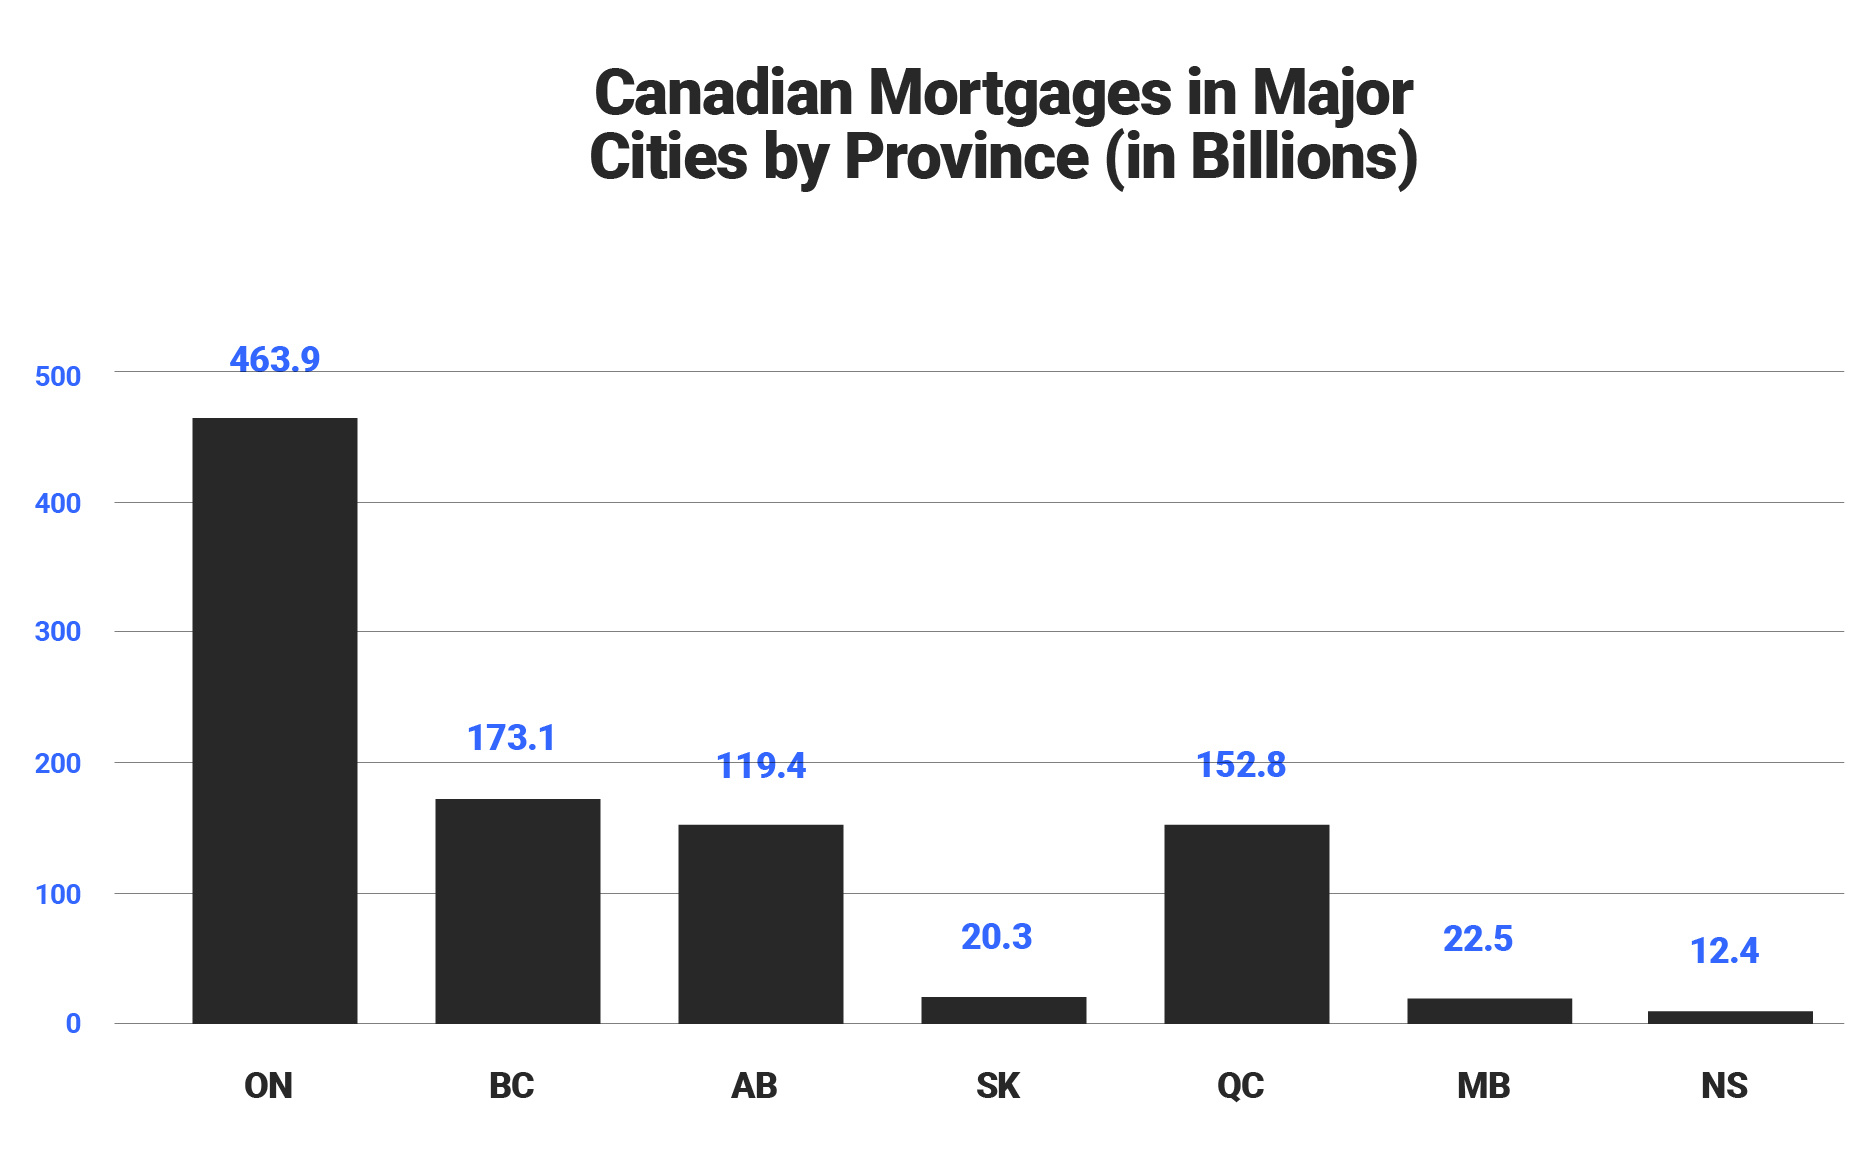 Canadian Mortgages in Major Cities by Province